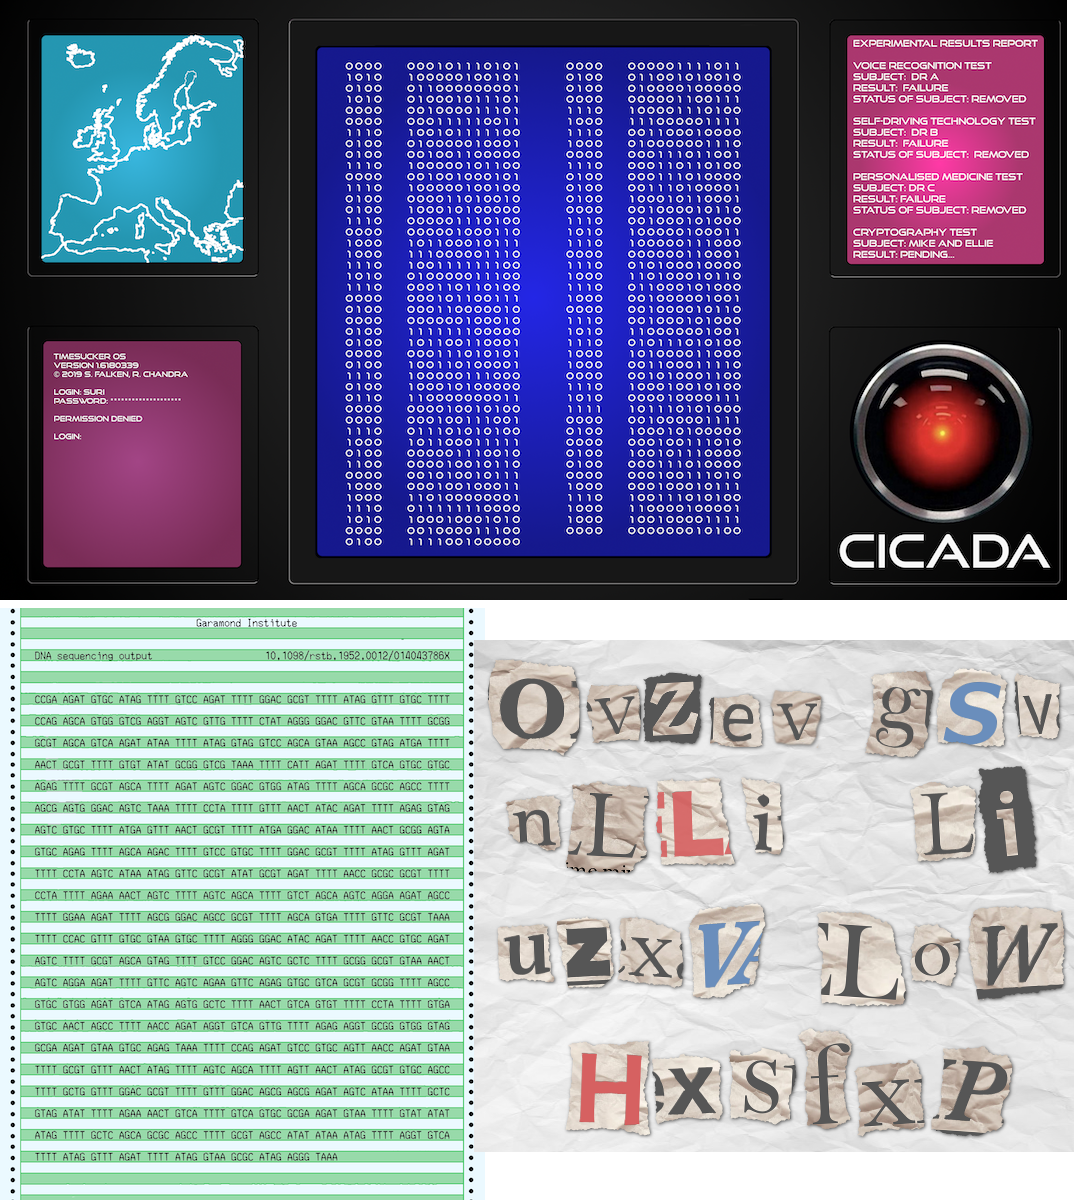 Three images of puzzles, including a mocked-up dot matrix printout with ATCG codes, a computer screen showing binary codes, and a ‘ransom note’ message made from letters torn out of a newspaper